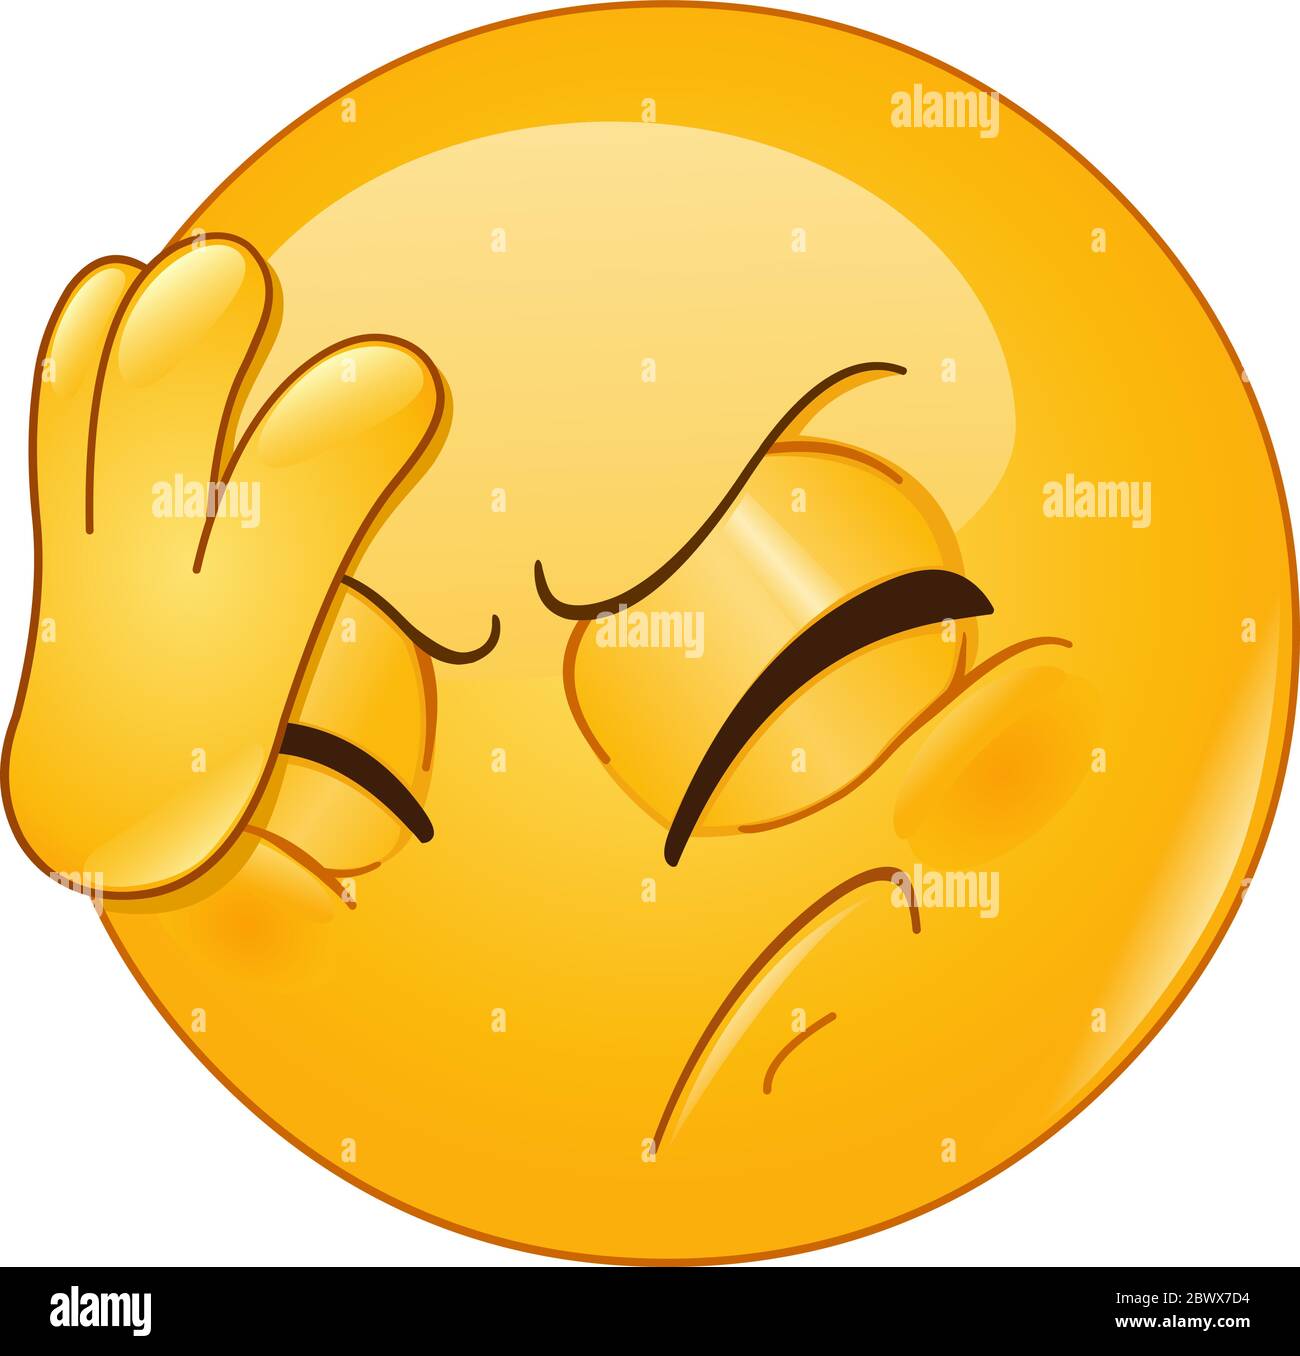 Emoticon placing hand on head. Face palm gesture. Stock Vector